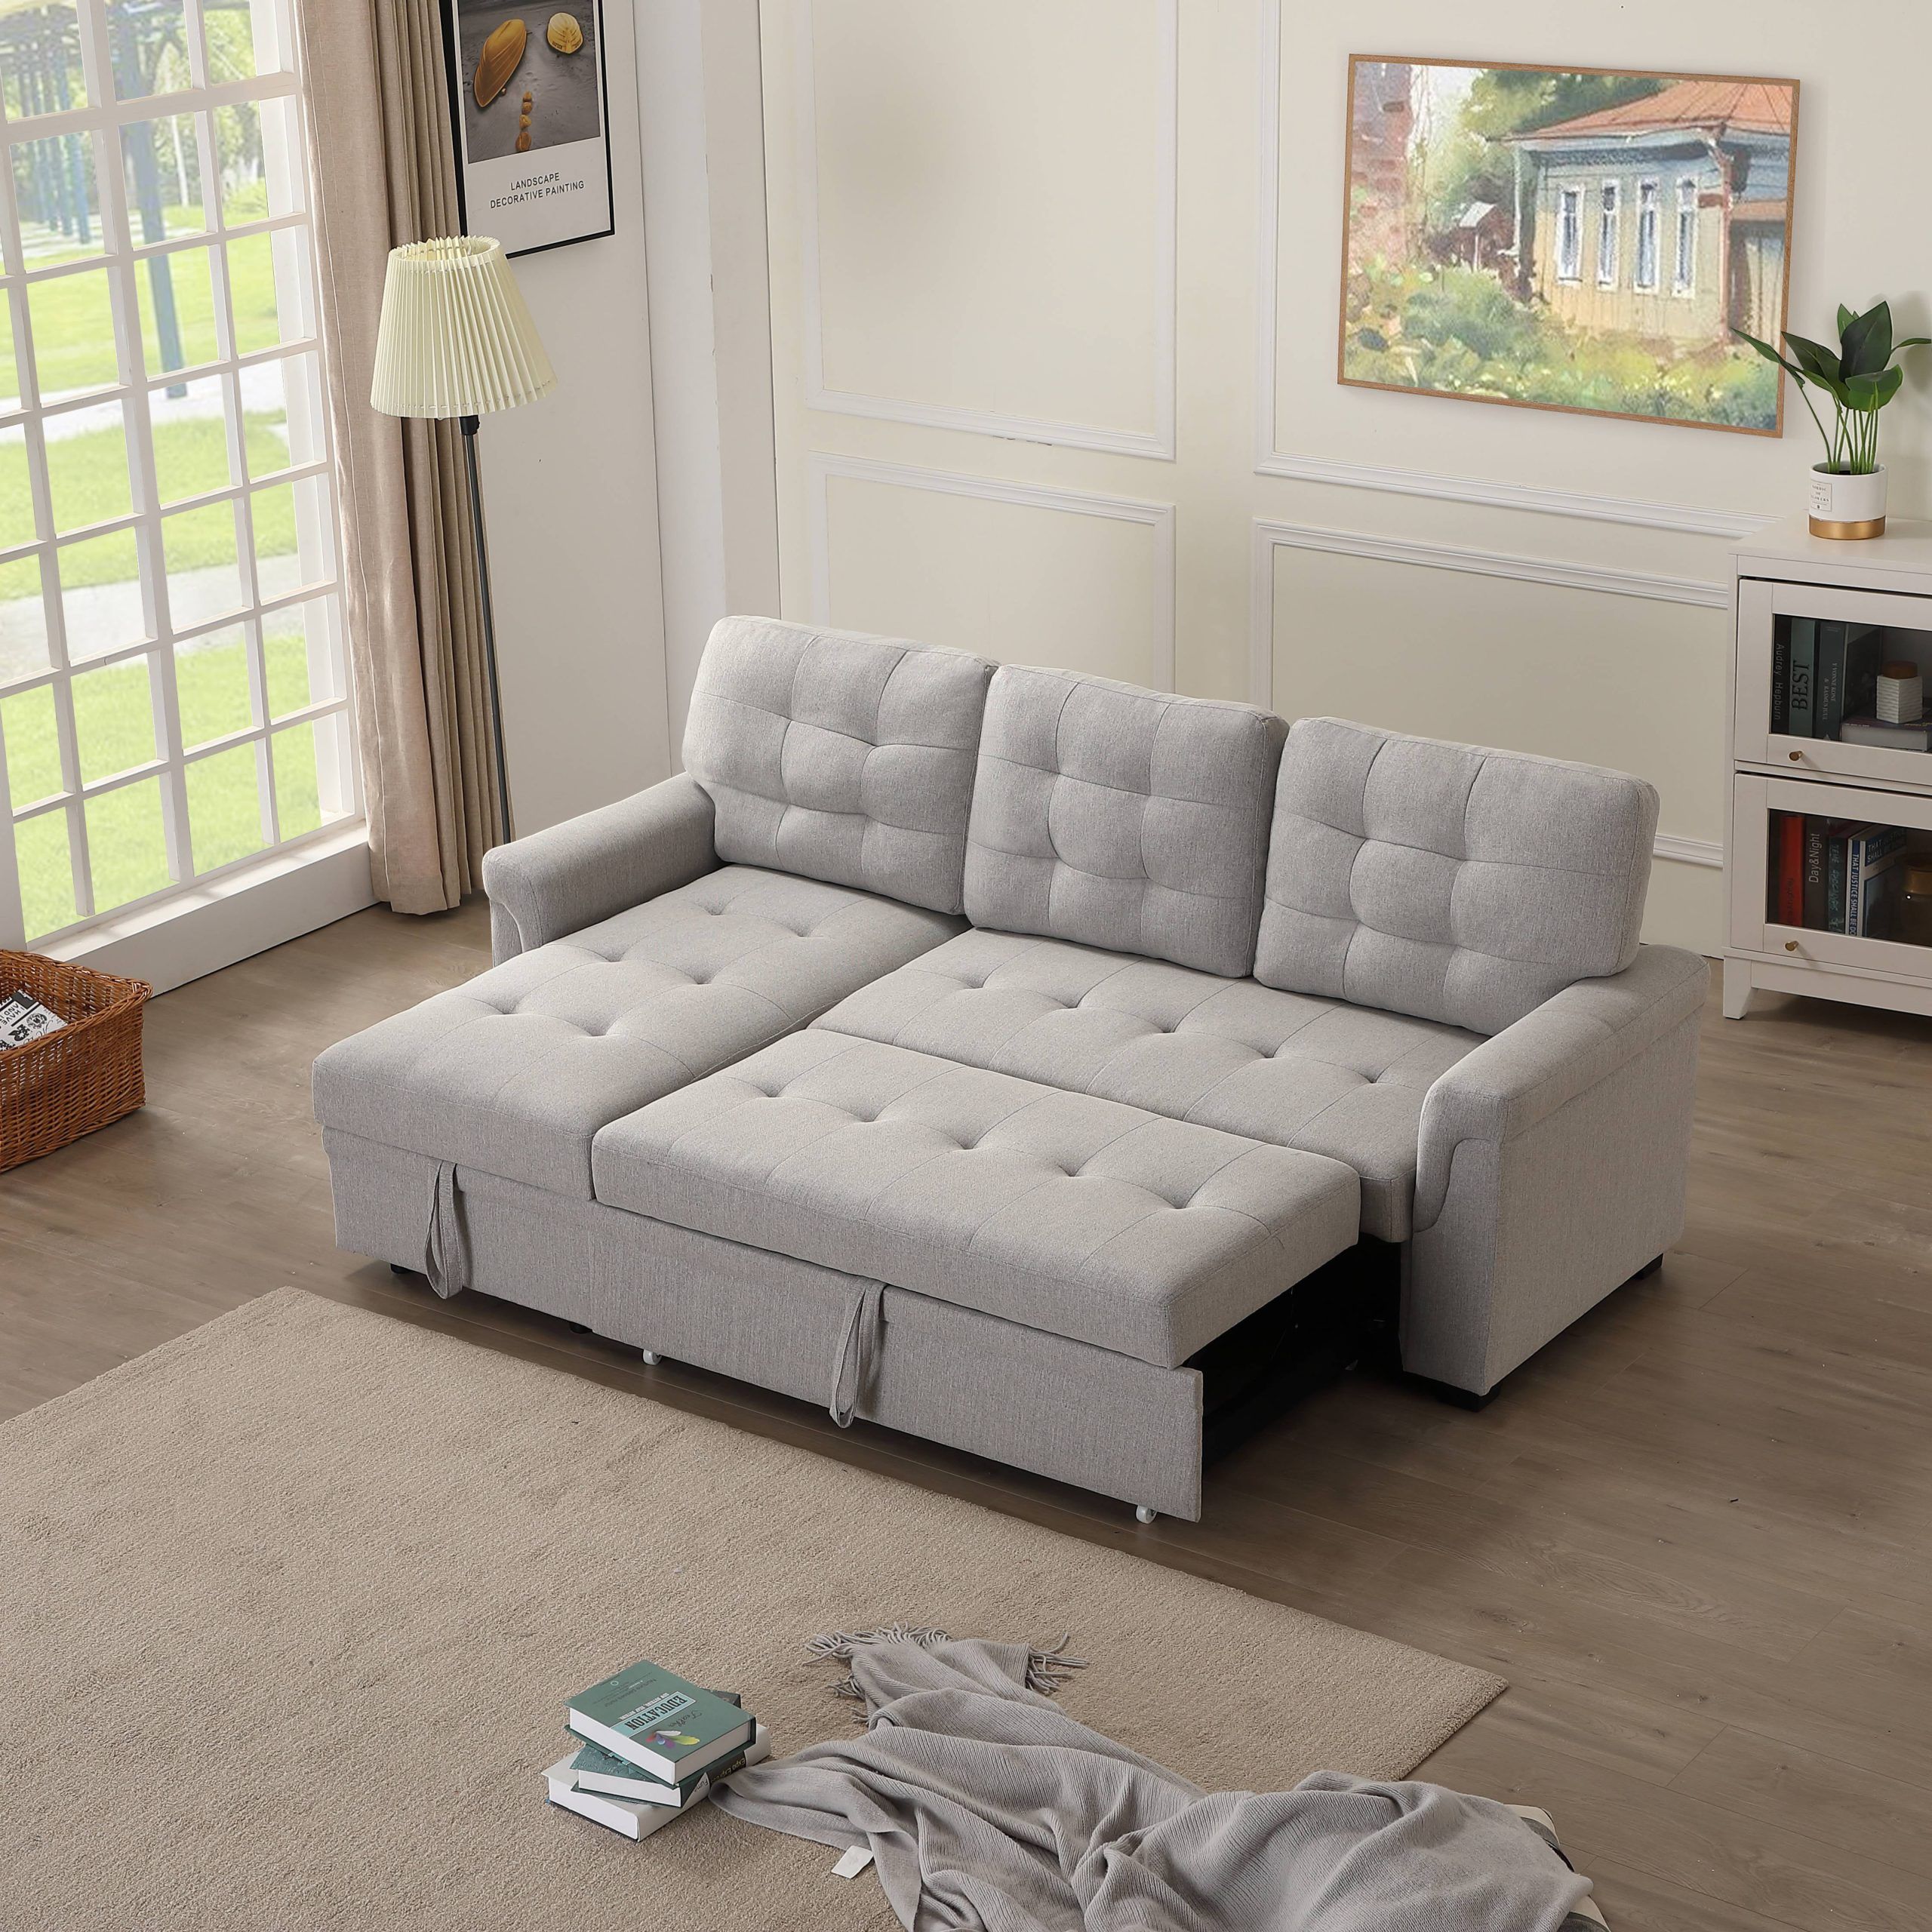 Clearance! 86"w L Shape Sectional Sofa With Reversible Chaise, Mid With Regard To Best And Newest L Shape Couches With Reversible Chaises (Photo 4 of 15)